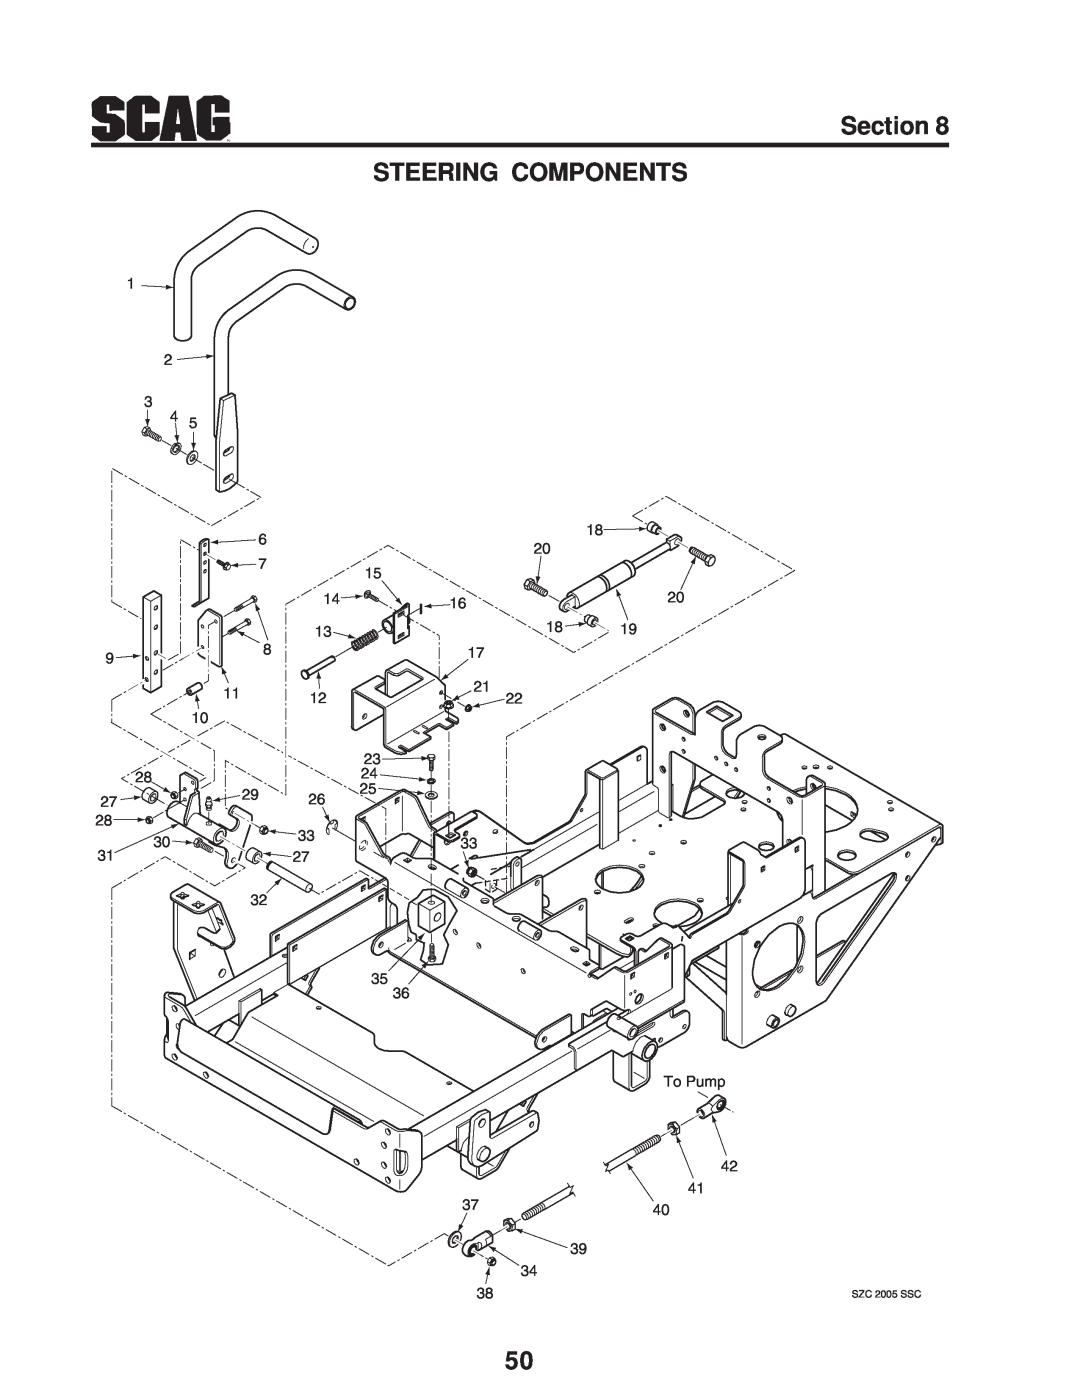 Scag Power Equipment manual To Pump, SZC 2005 SSC, Steering Components 